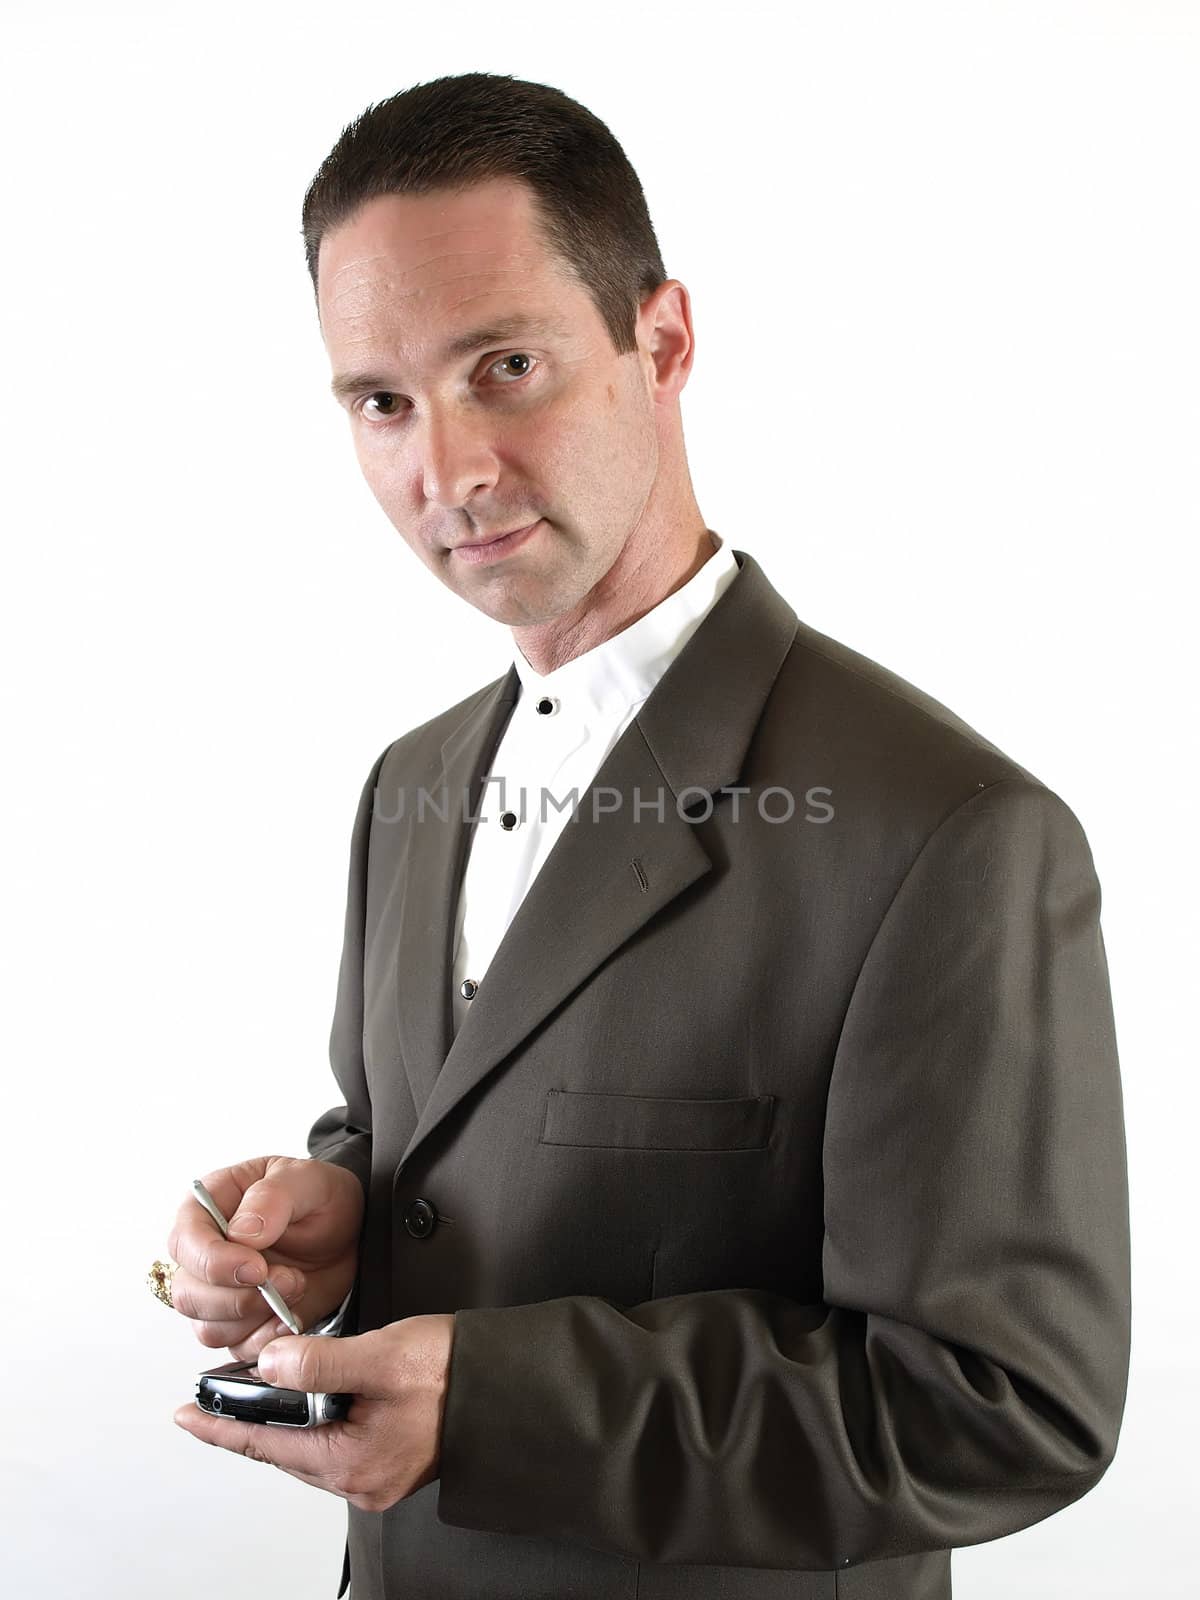 A man in a suit holds a pda in his hand, ready to make a note.